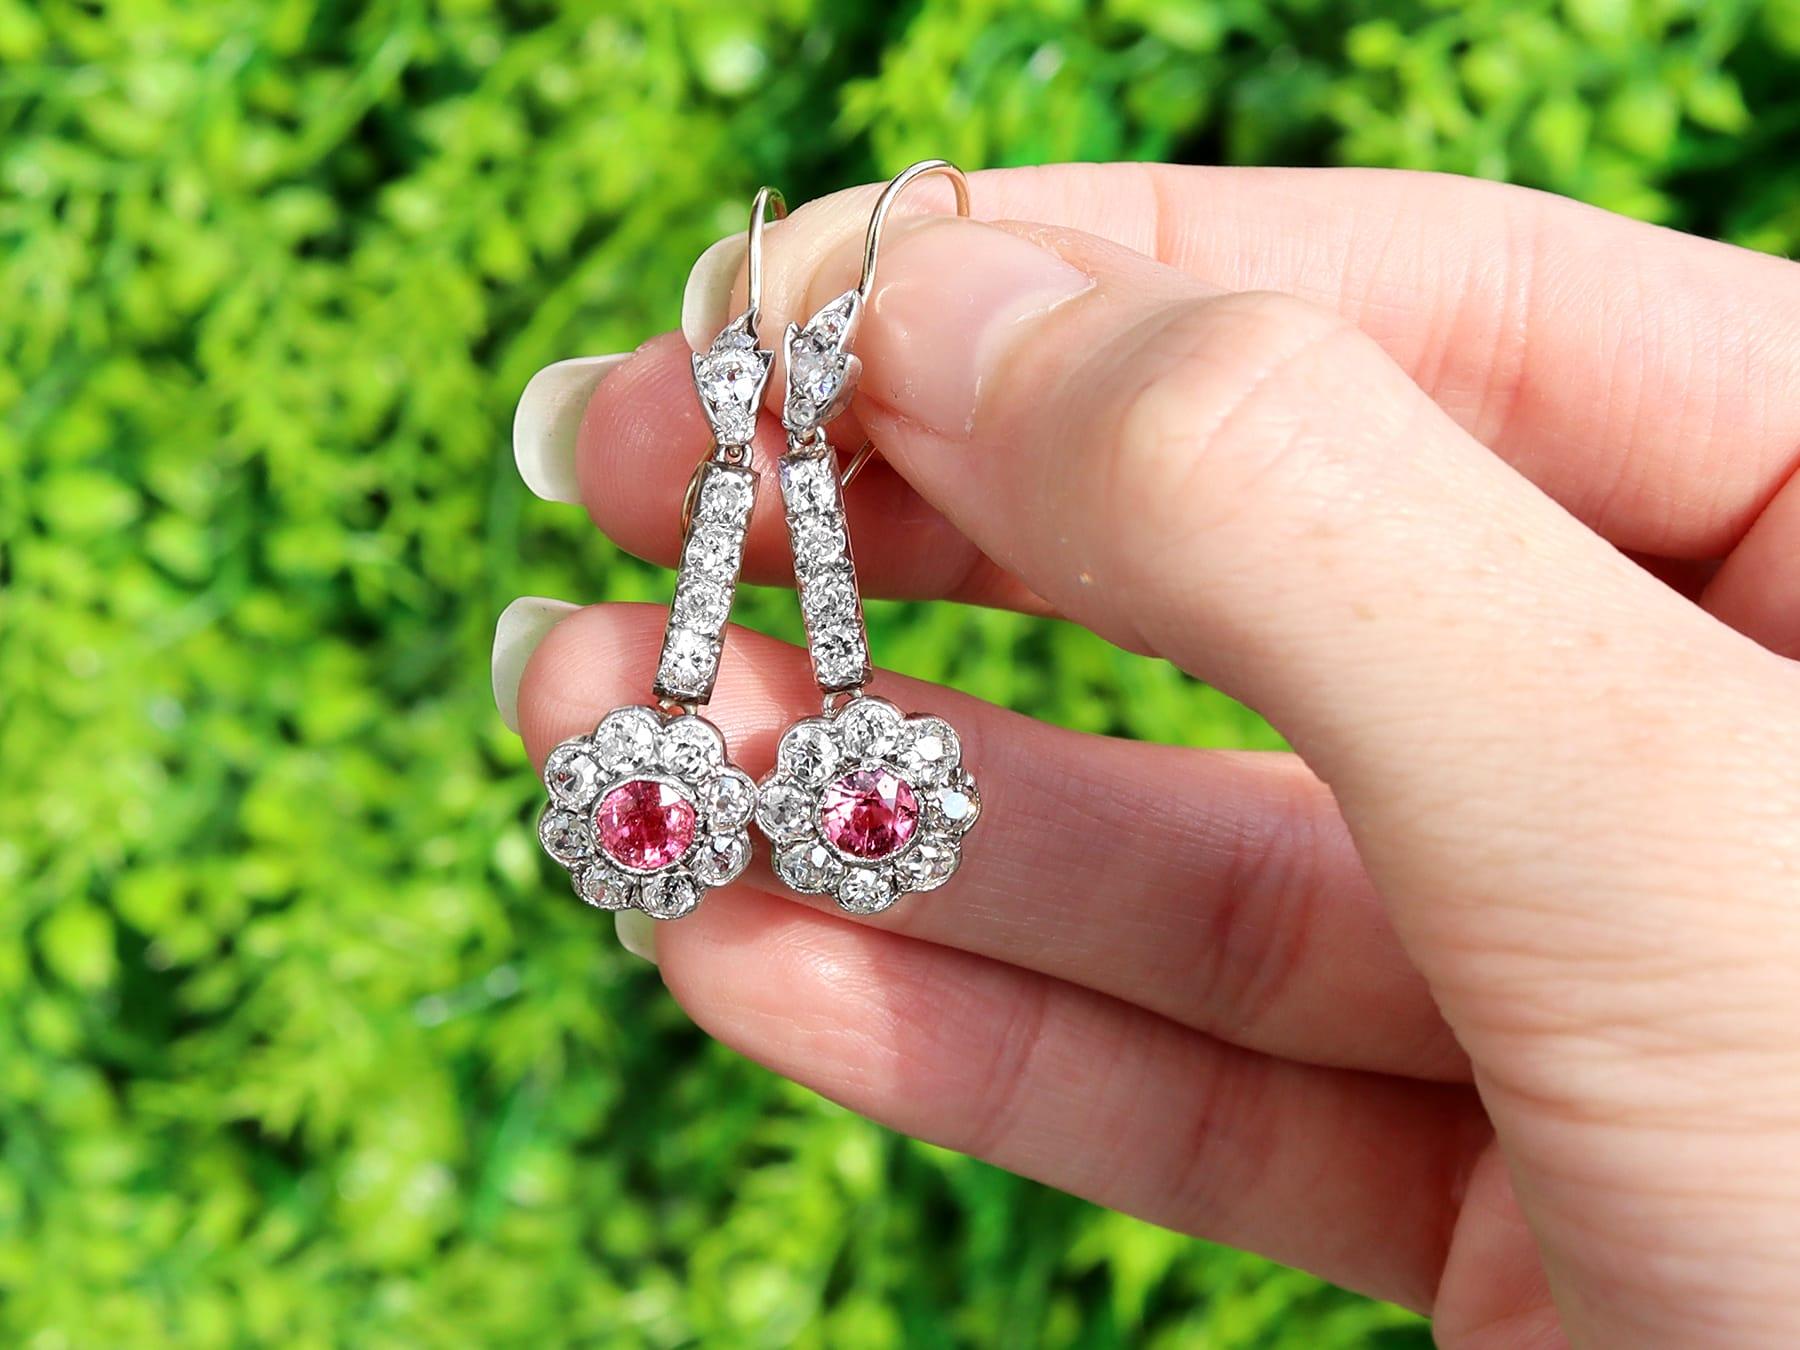 A stunning, fine and impressive pair of antique 1.05 carat natural pink sapphire and 2.42 carat diamond, 12 karat yellow gold, silver set drop earrings; part of our antique jewelry and estate jewelry collections

These stunning, fine and impressive